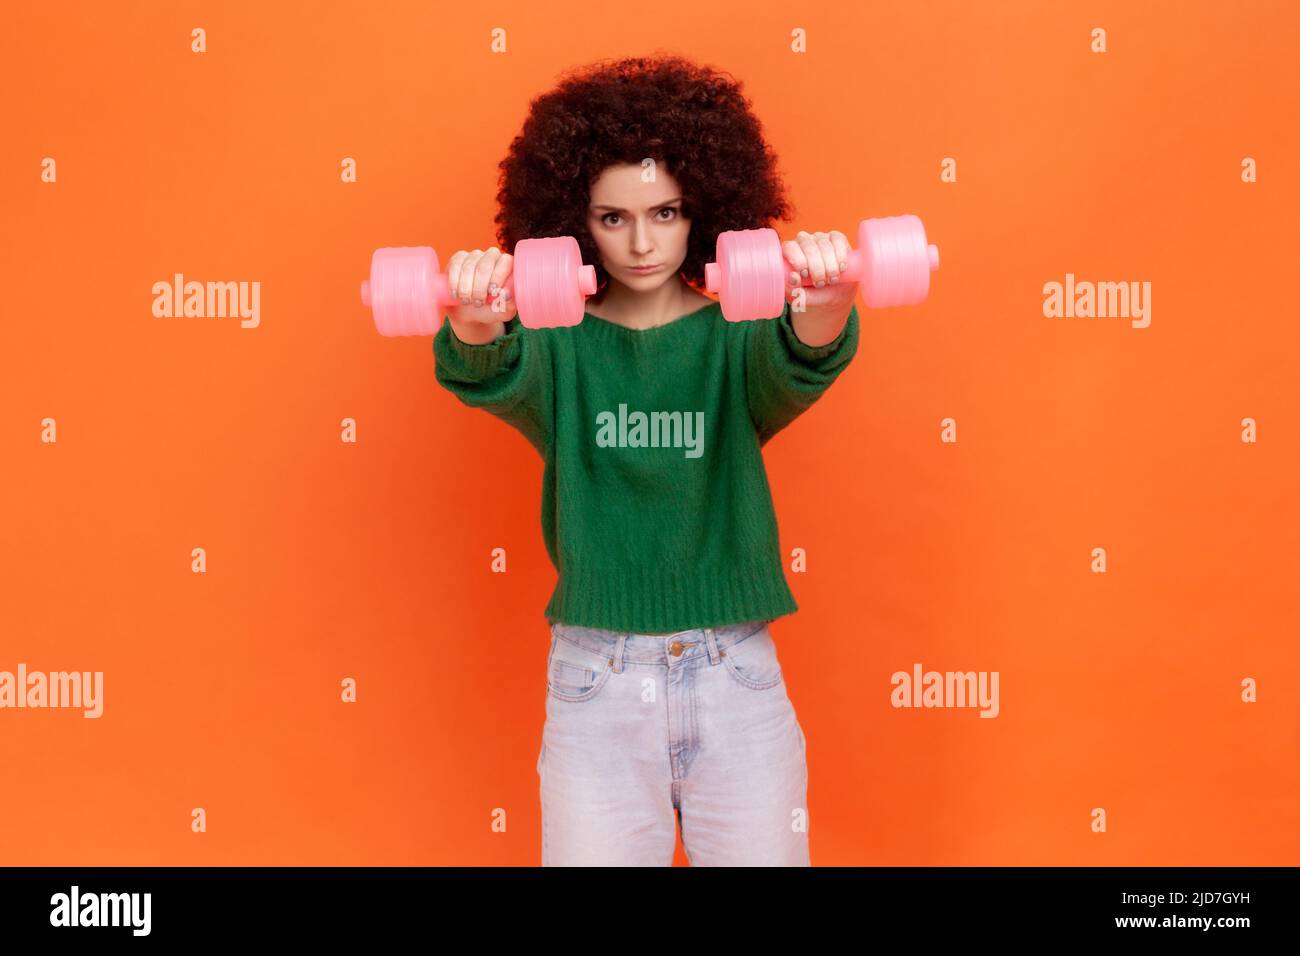 Strong confident woman with Afro hairstyle wearing green casual style sweater holding out pink dumbbells to camera, work out alone. Indoor studio shot isolated on orange background. Stock Photo